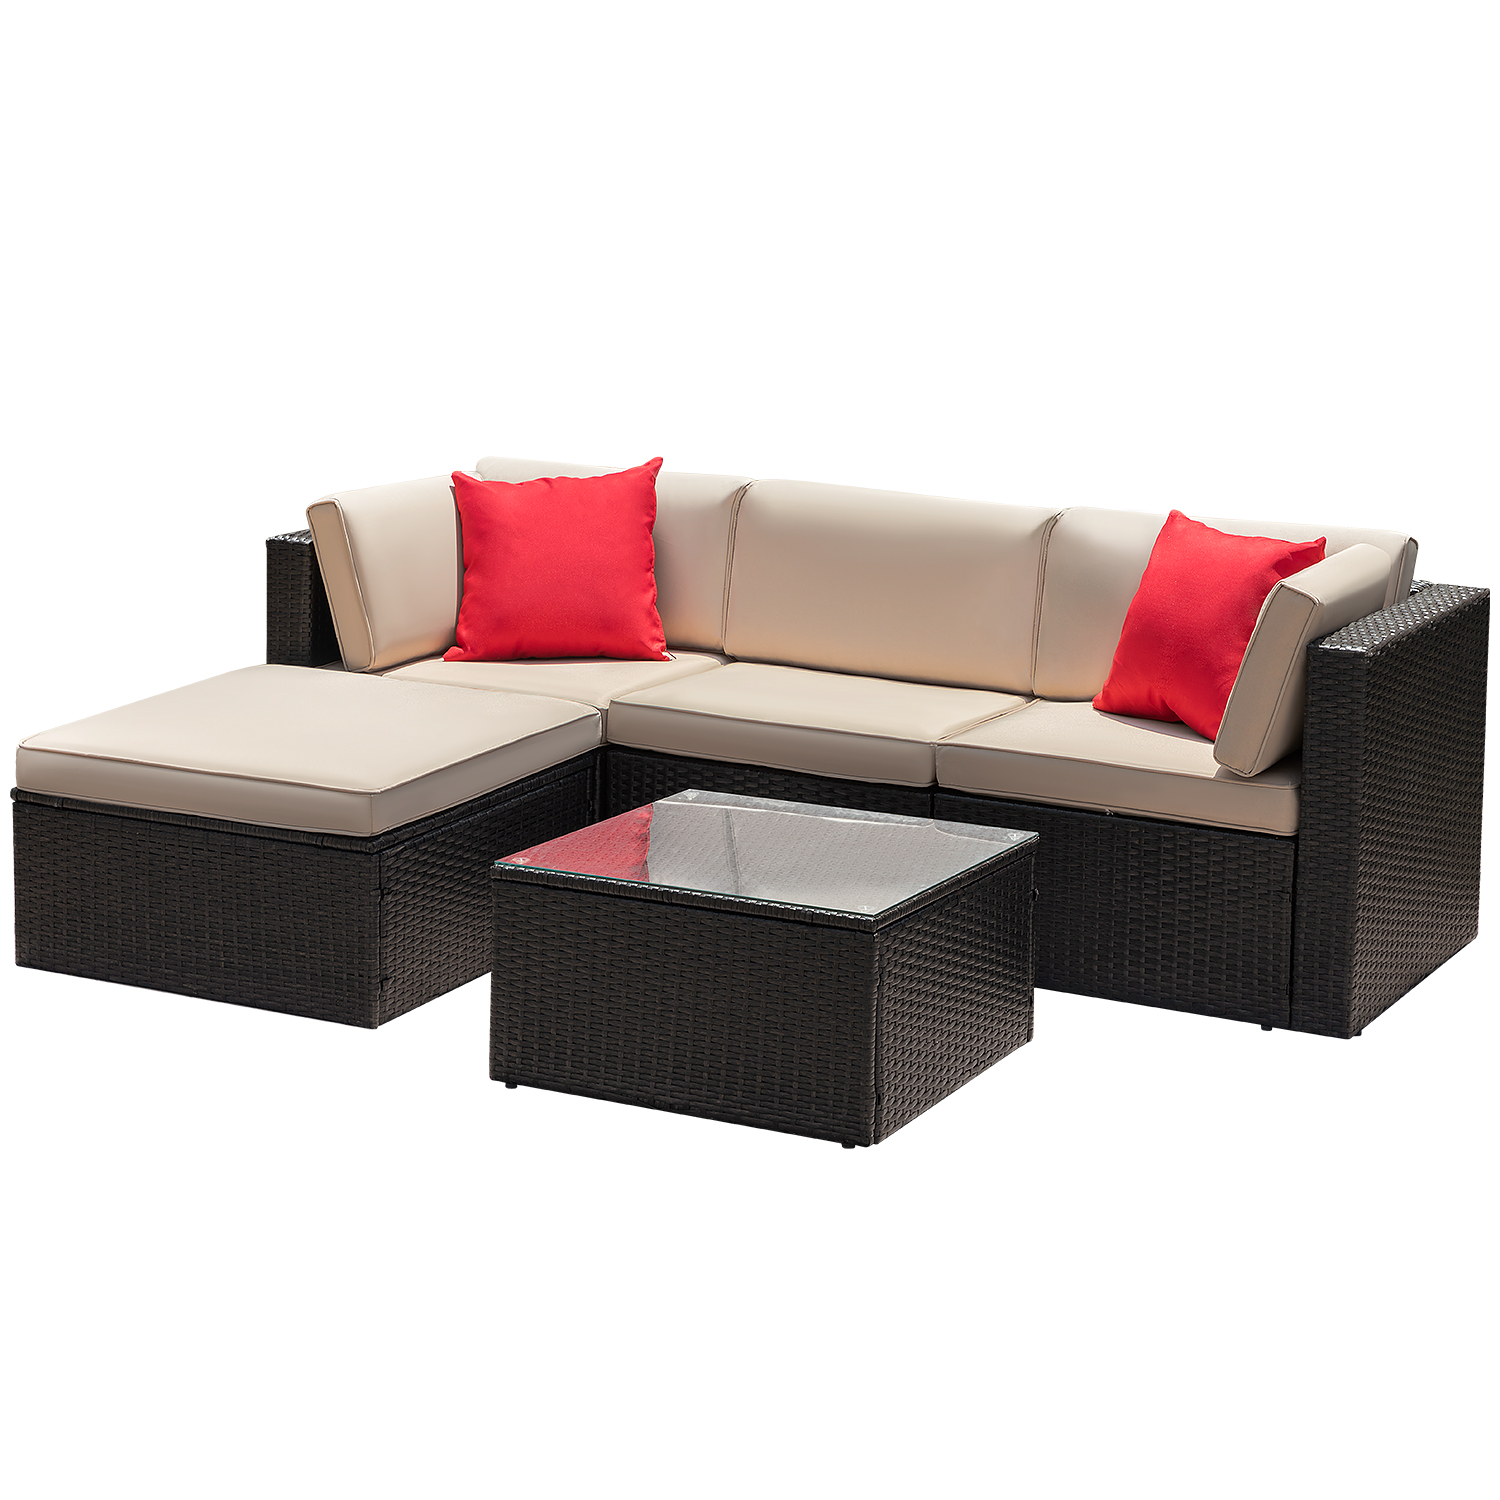 LACOO 5 Pieces Patio Sectional Set PE Rattan Outdoor All-Weather Wicker Conversation Set with Table, Beige - image 3 of 8